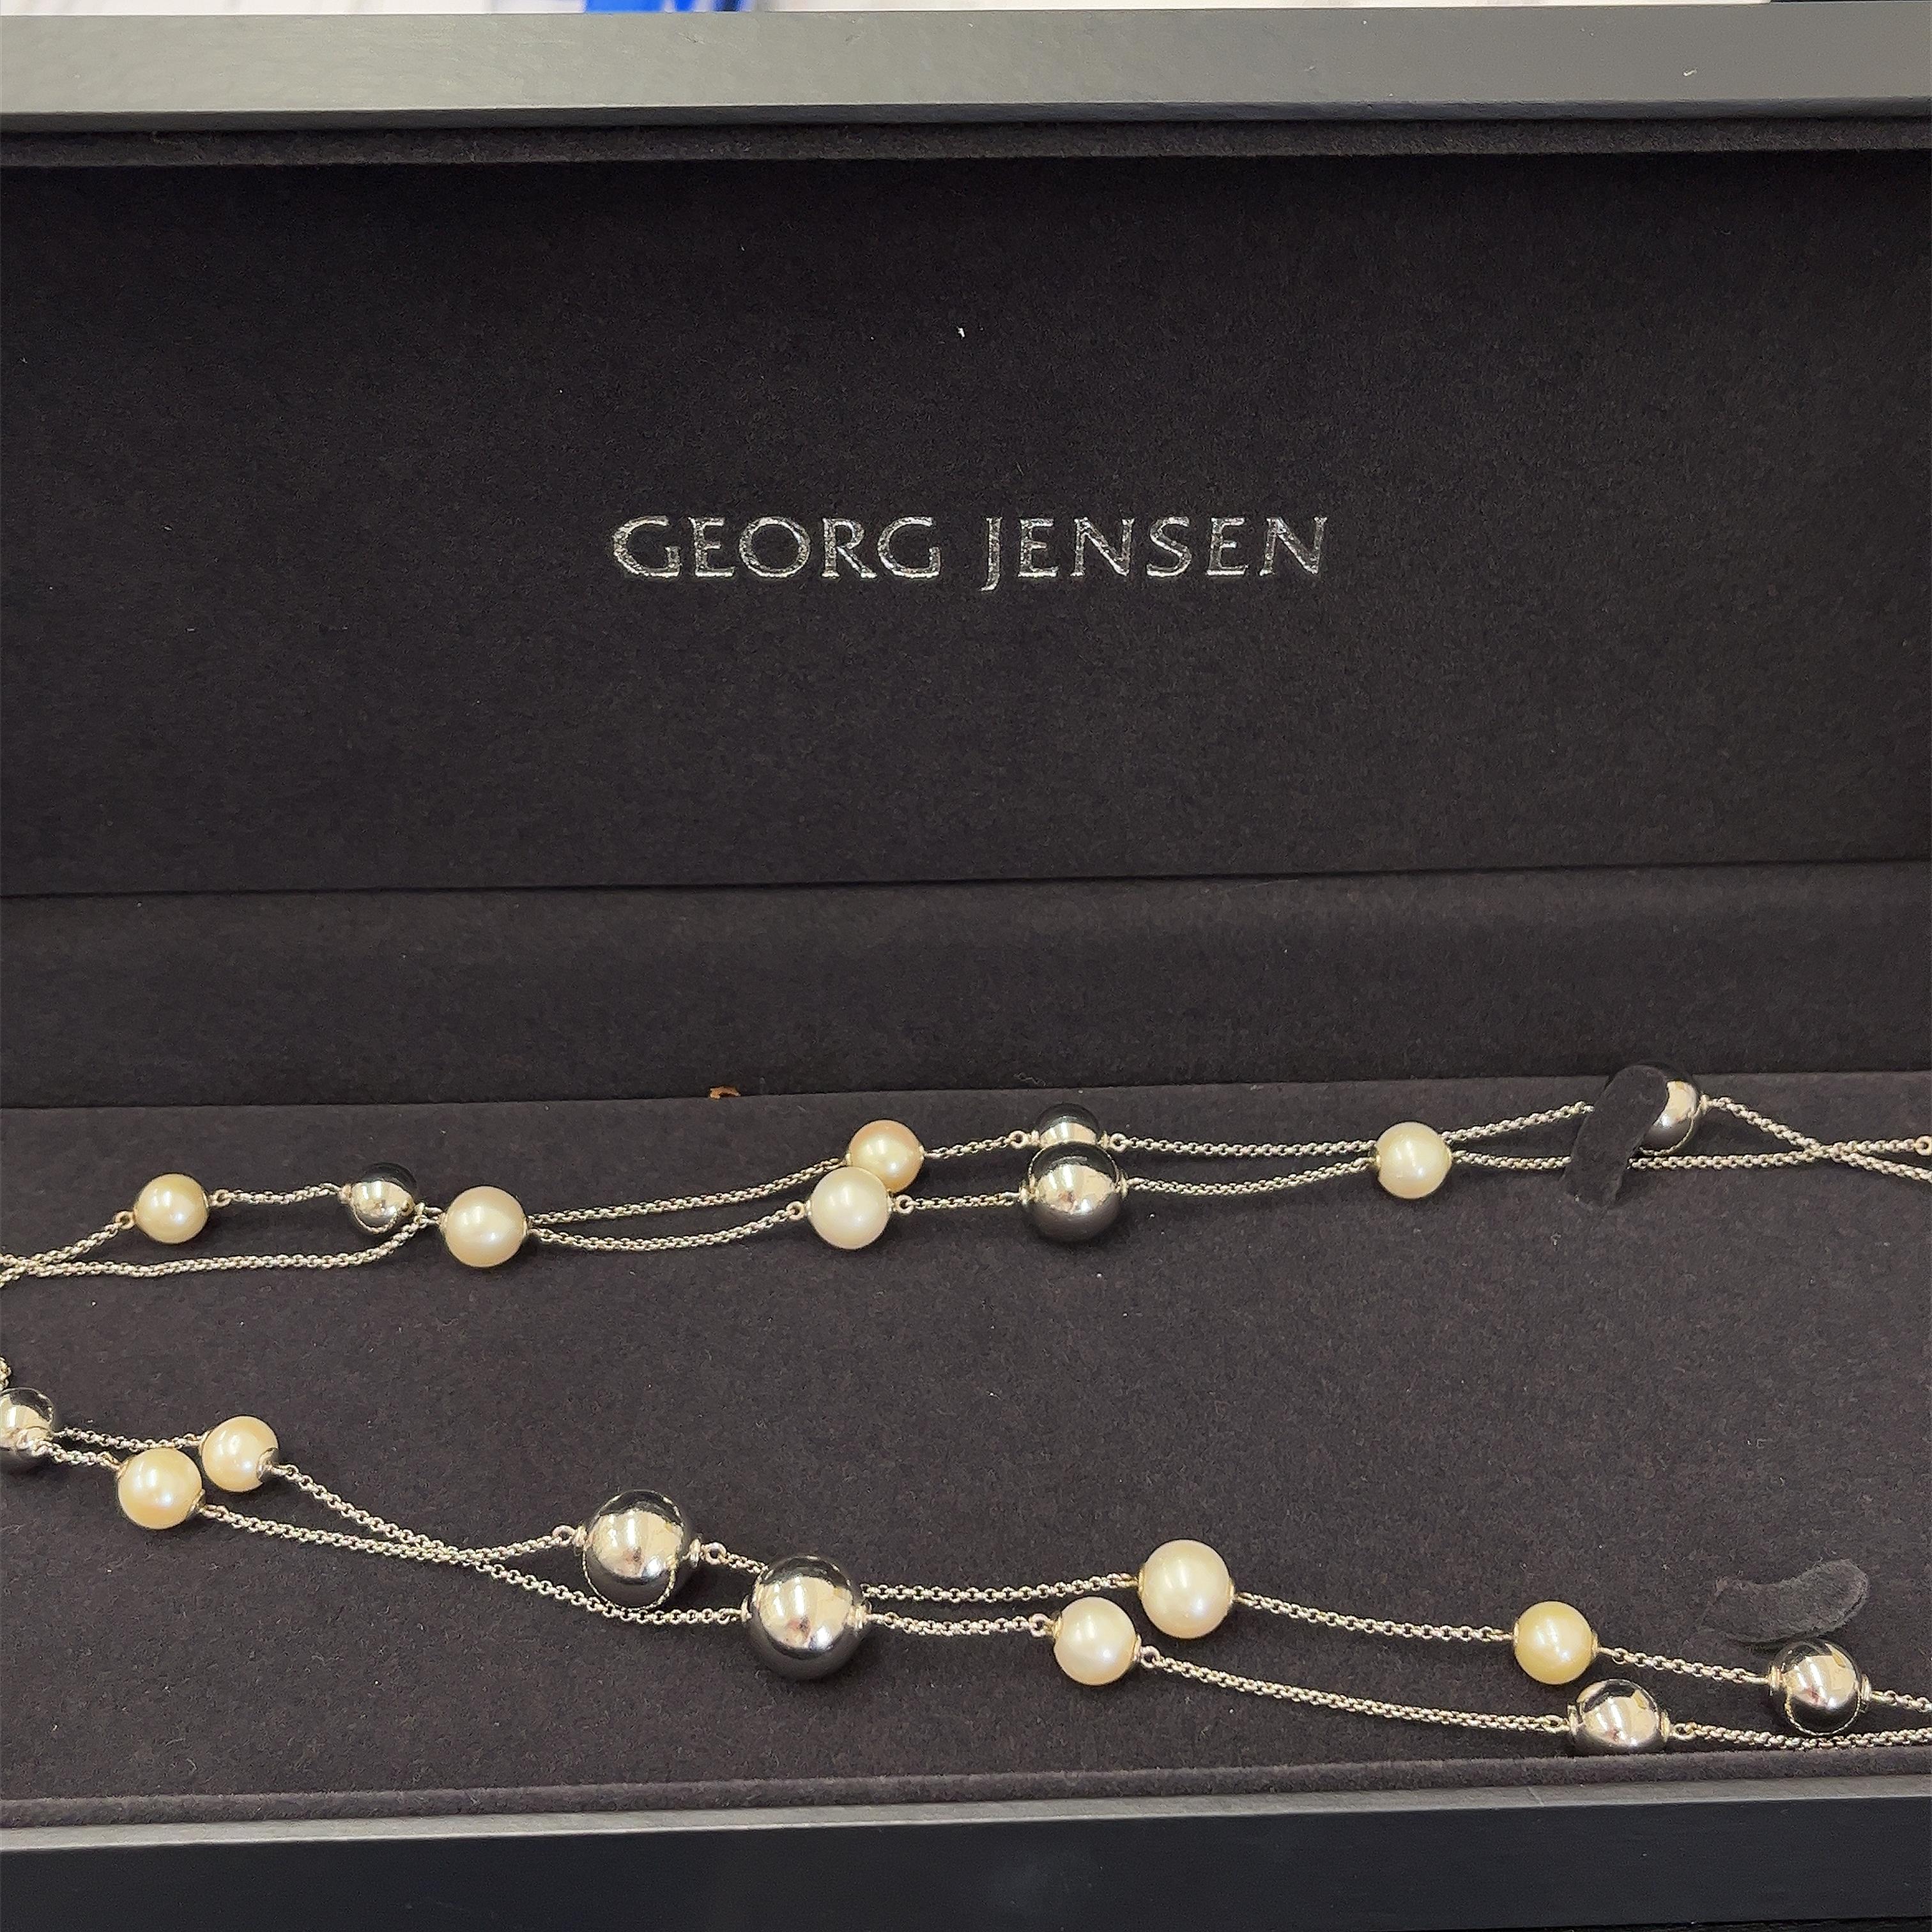 Beautifully designed, classic 
Georg Jensen necklace.
The necklace is masterfully crafted from 
sterling silver and elegant white pearls.
Wear with matching earrings from the same collection 
for a sophisticated evening look.

Total Weight: